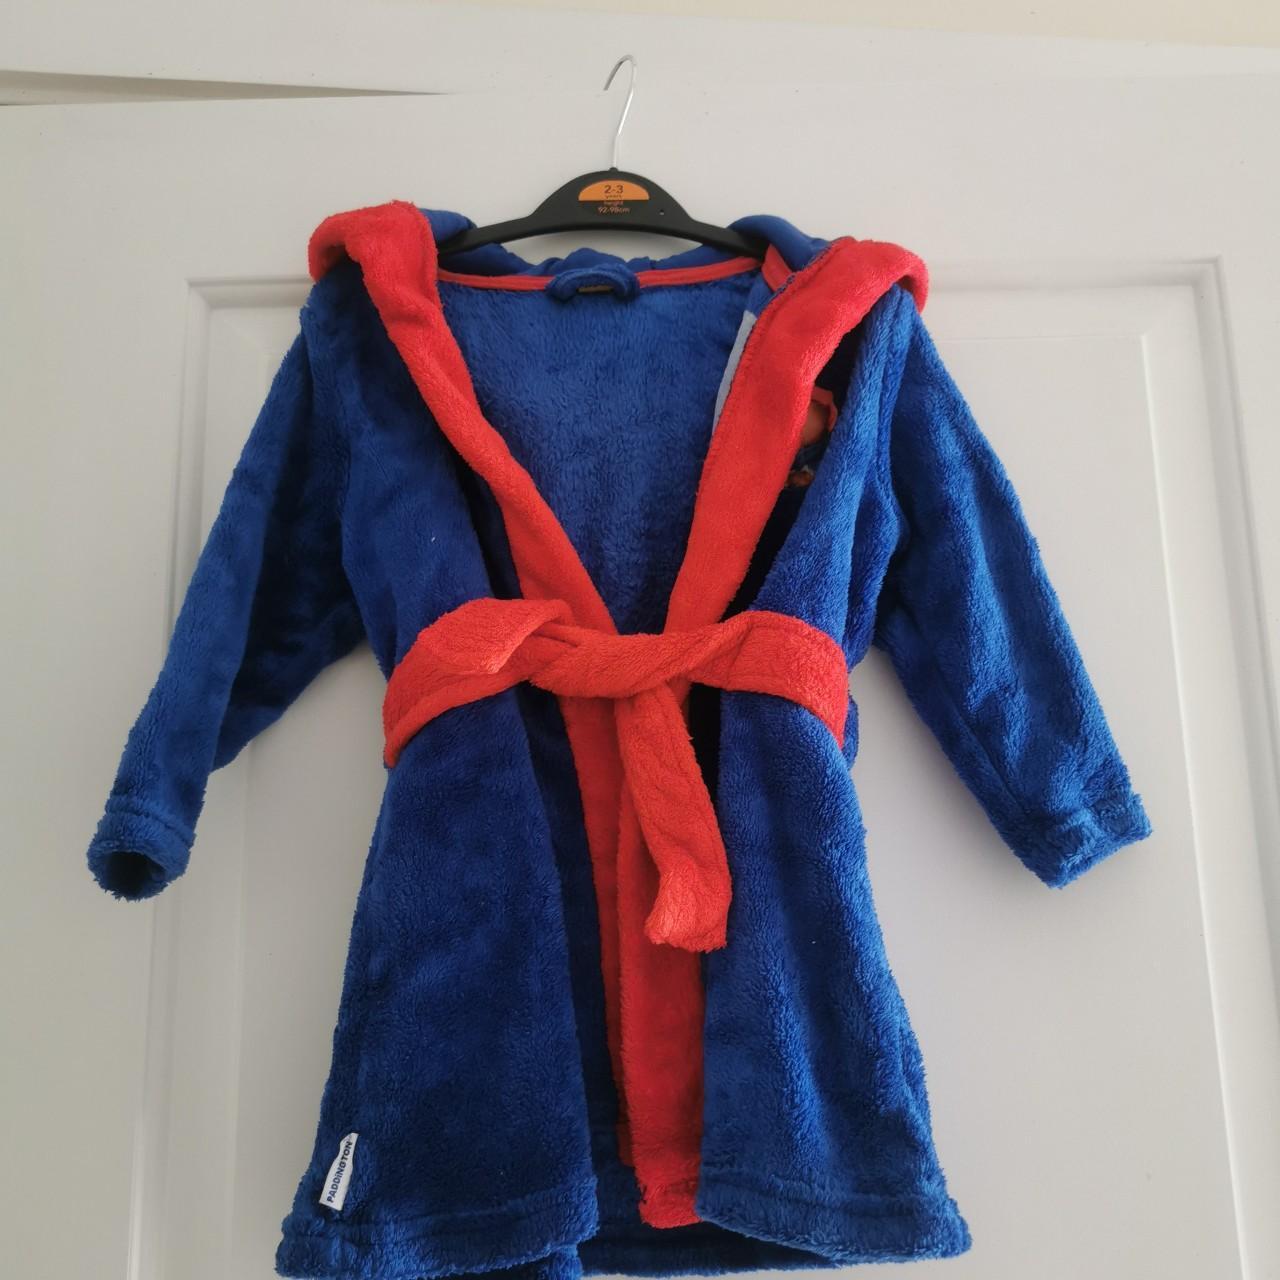 Blue and Red Robe | Depop